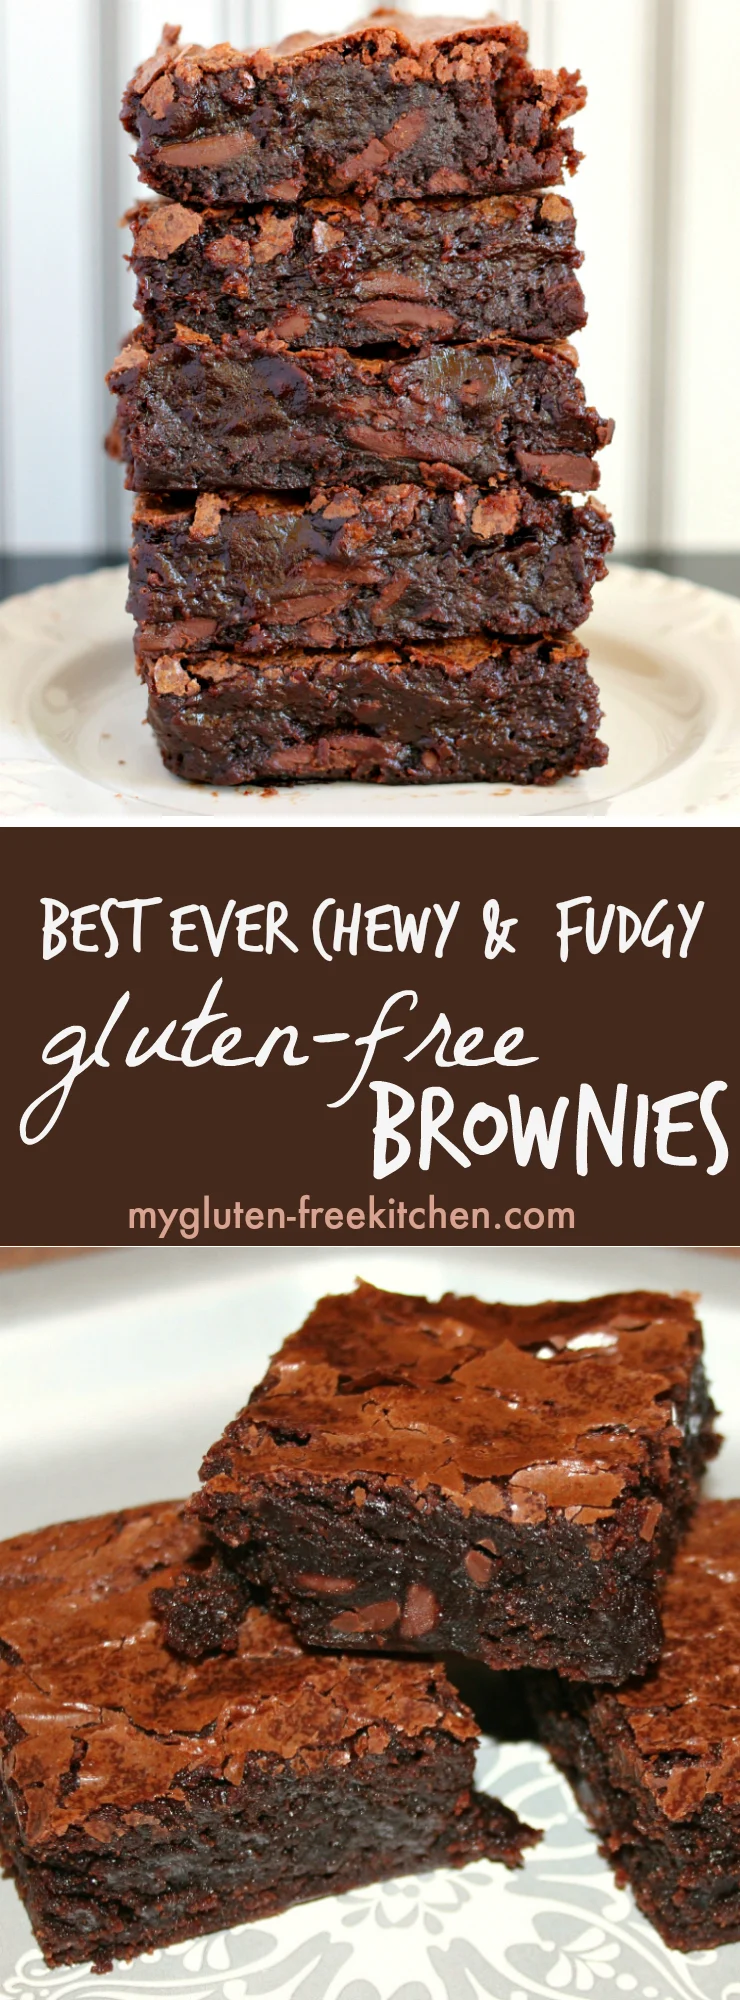 Best Ever Chewy & Fudgy Gluten-free Brownies Recipe. So easy to make too!